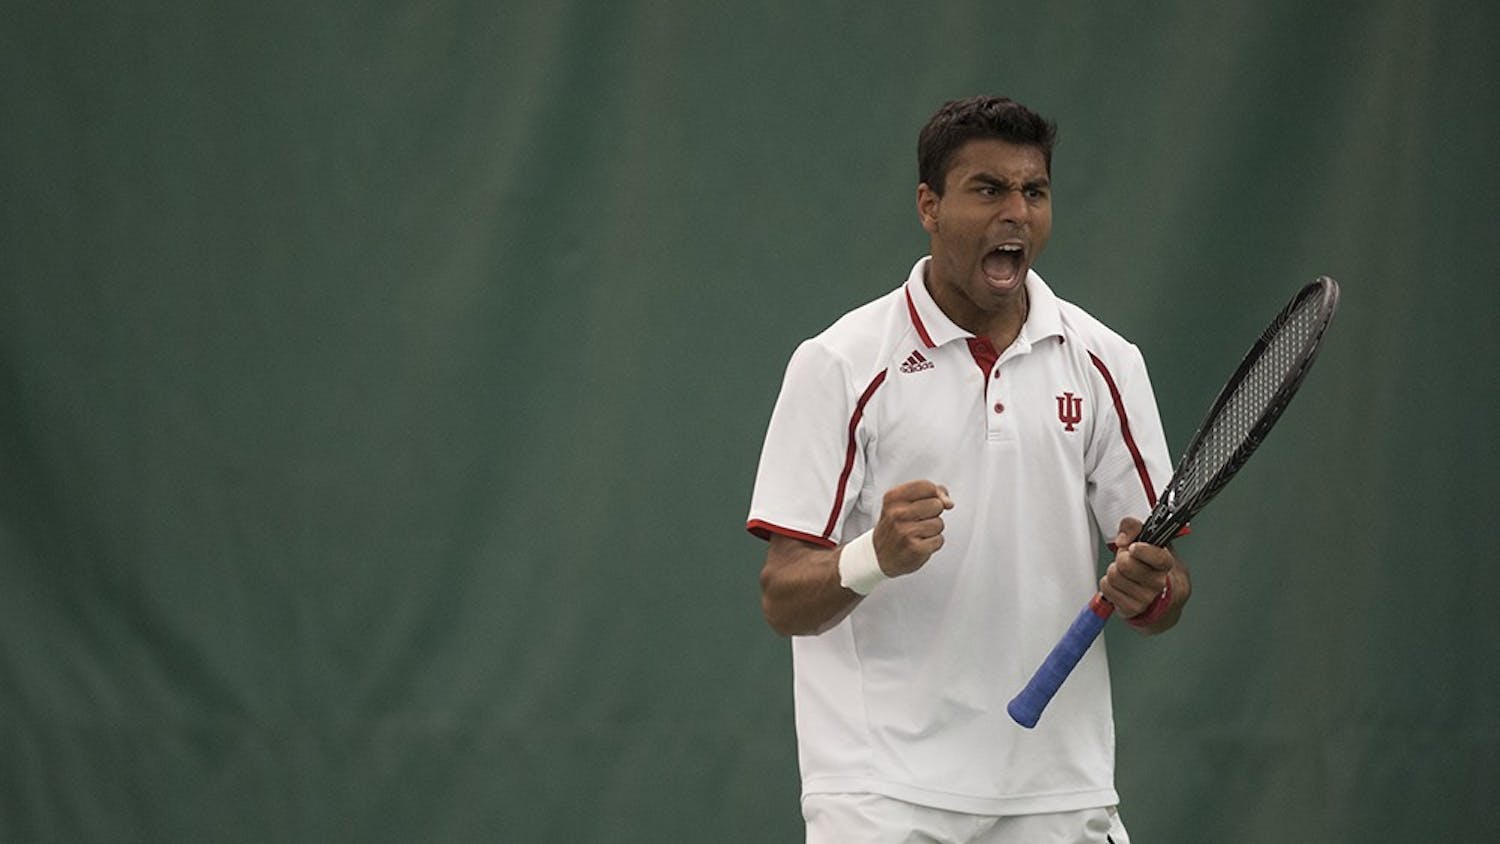 IU freshman Raheel Manji lets out a triumphant scream after scoring a point against John Mullane, a junior from Michigan State University, on Sunday at the IU Tennis Center. Manji won the match 6-4, 6-0.